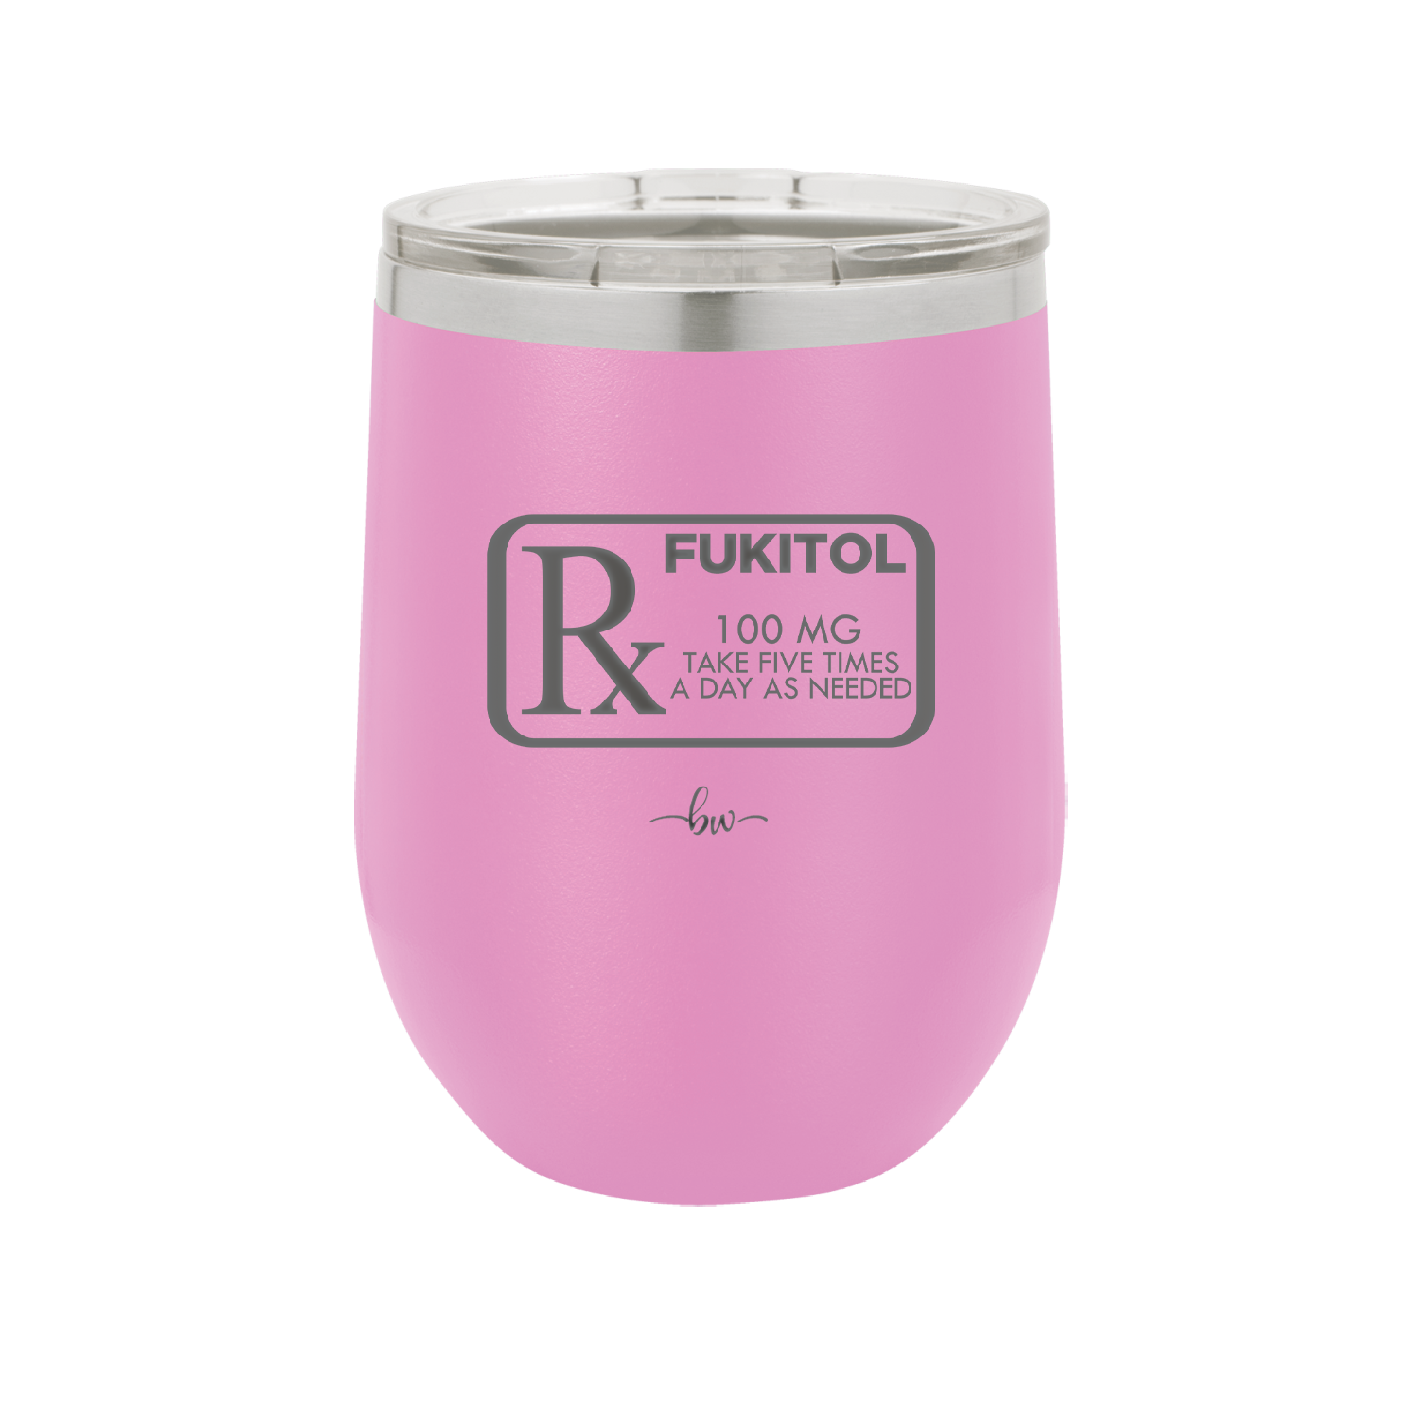 RX Fukitol 100MG 5x a Day - Laser Engraved Stainless Steel Drinkware - 2493 -